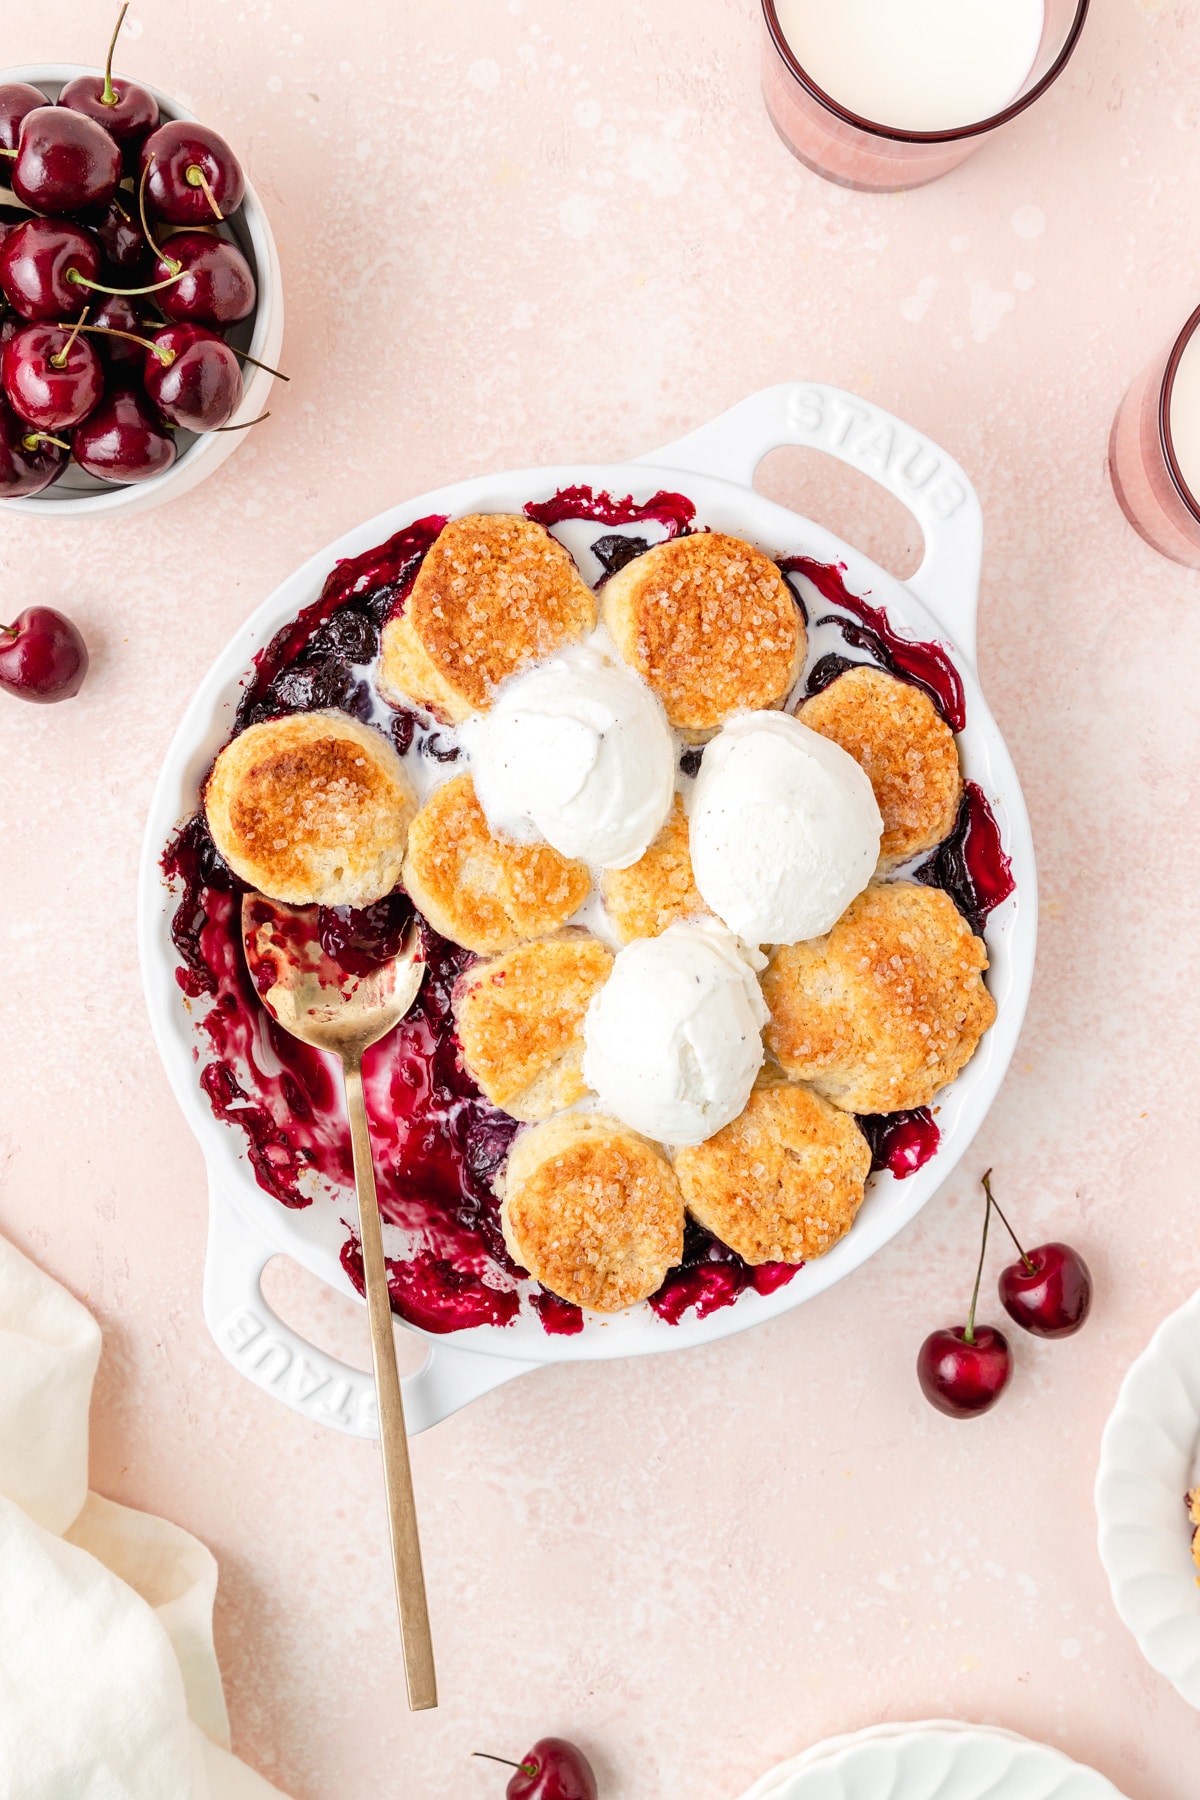 cherry cobbler with biscuit topping and ice cream on top.